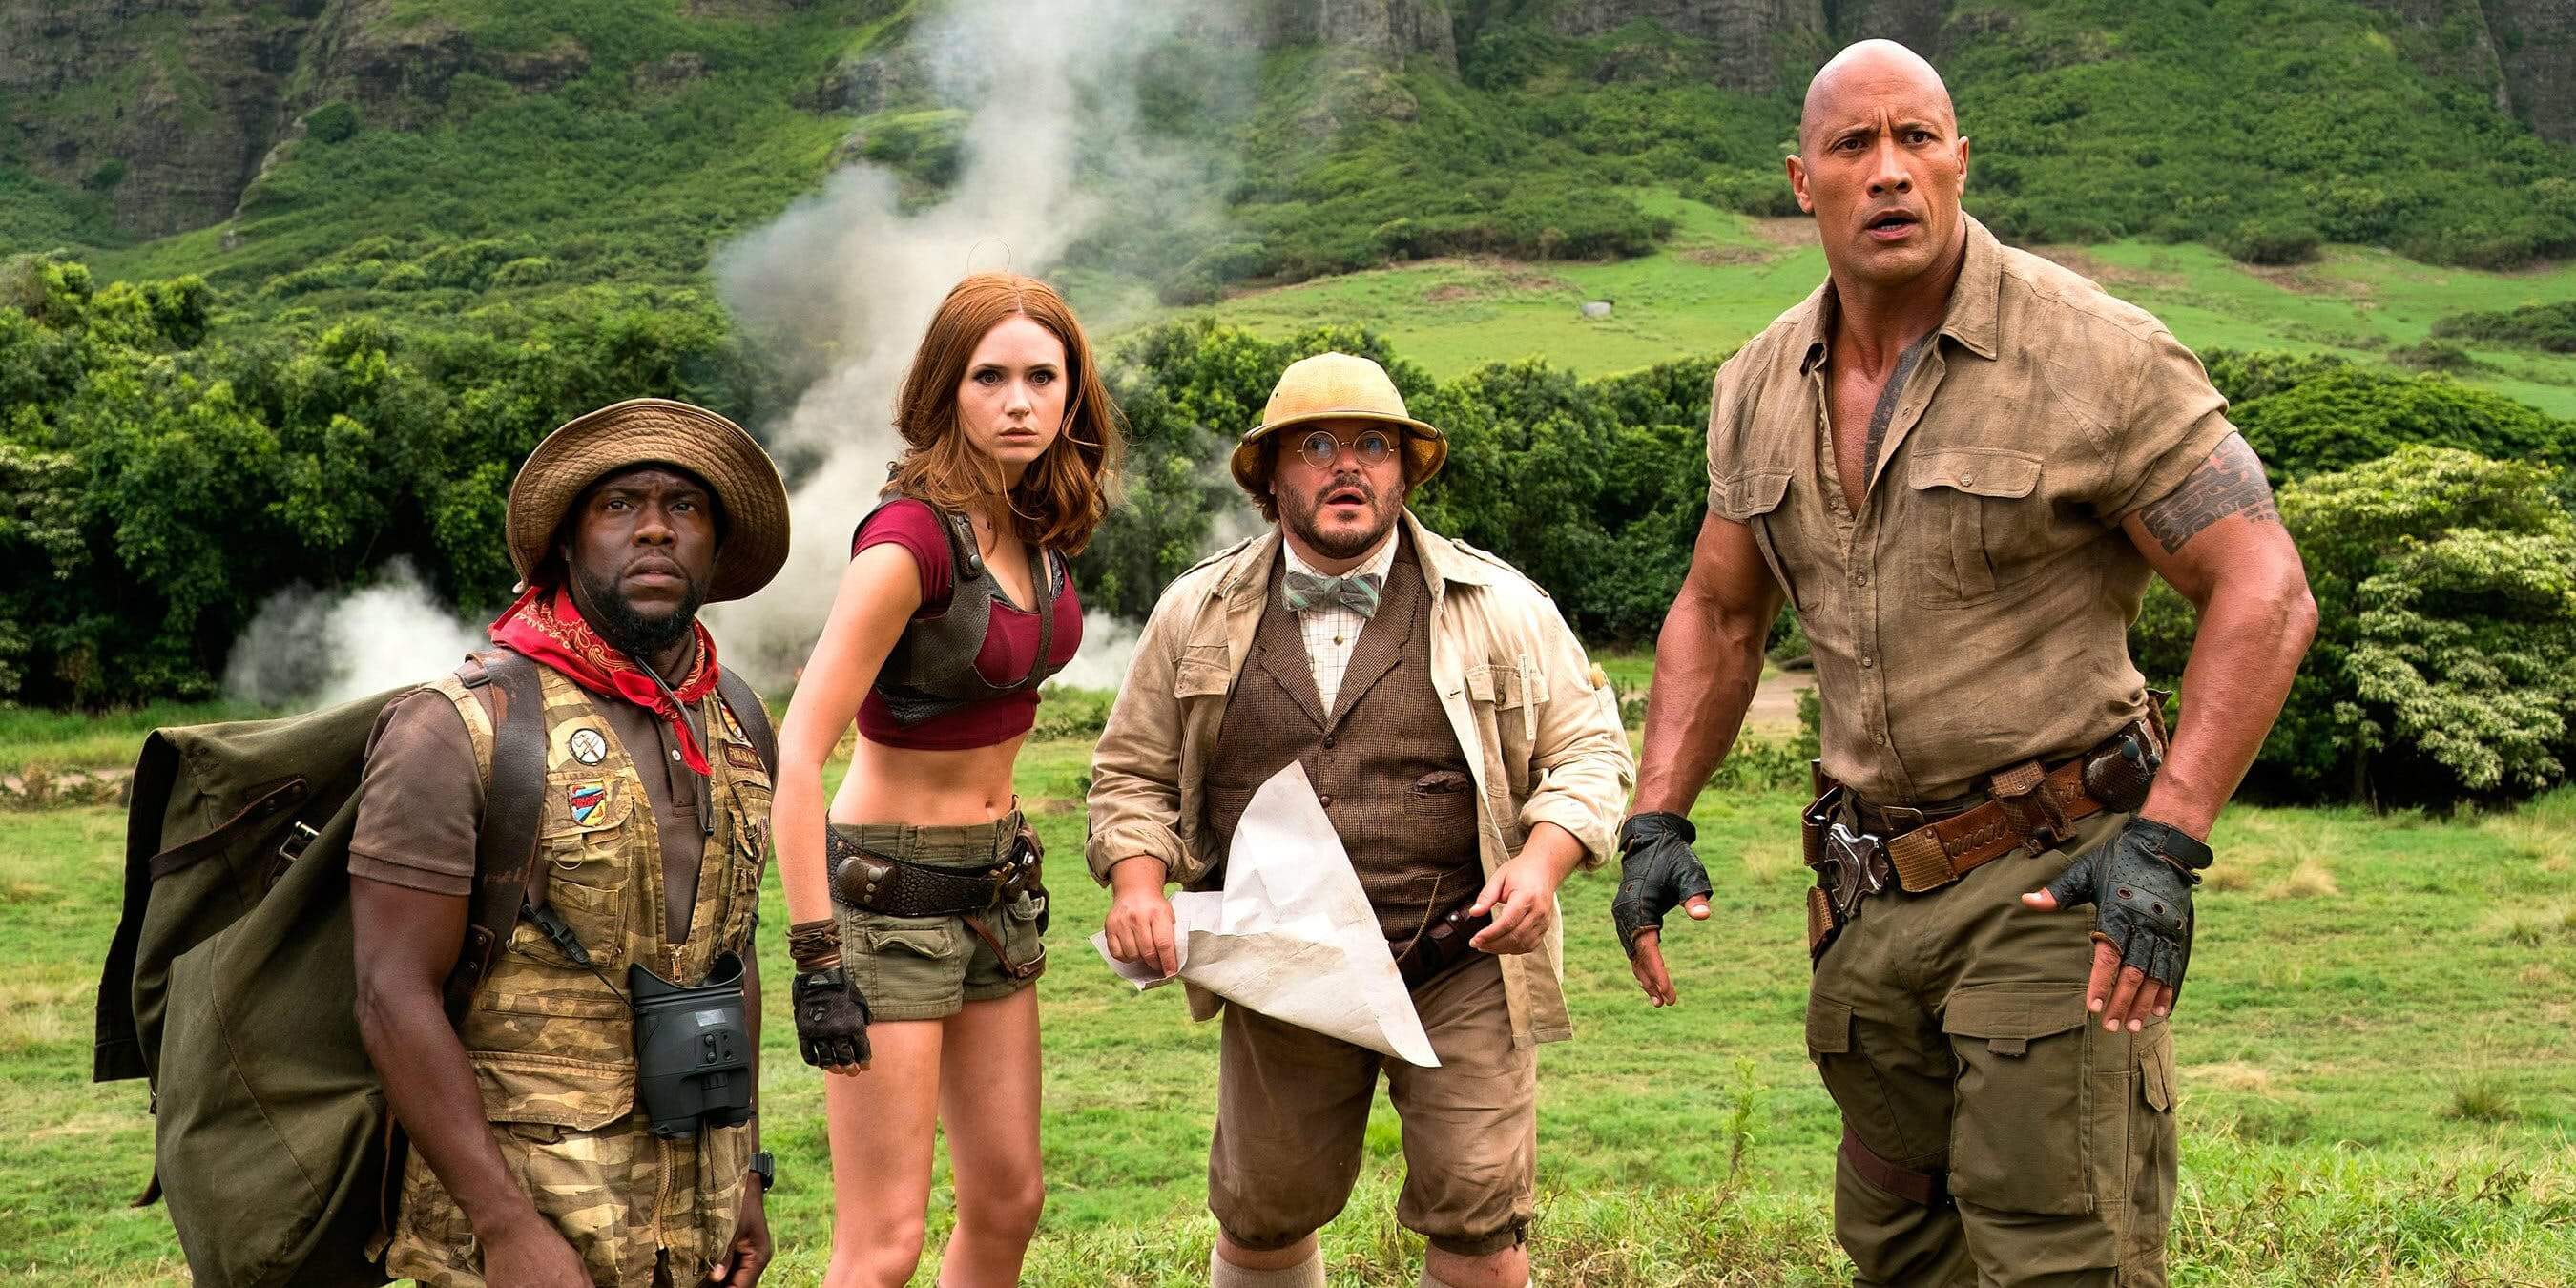 Jumanji: Welcome to the Jungle starburst review